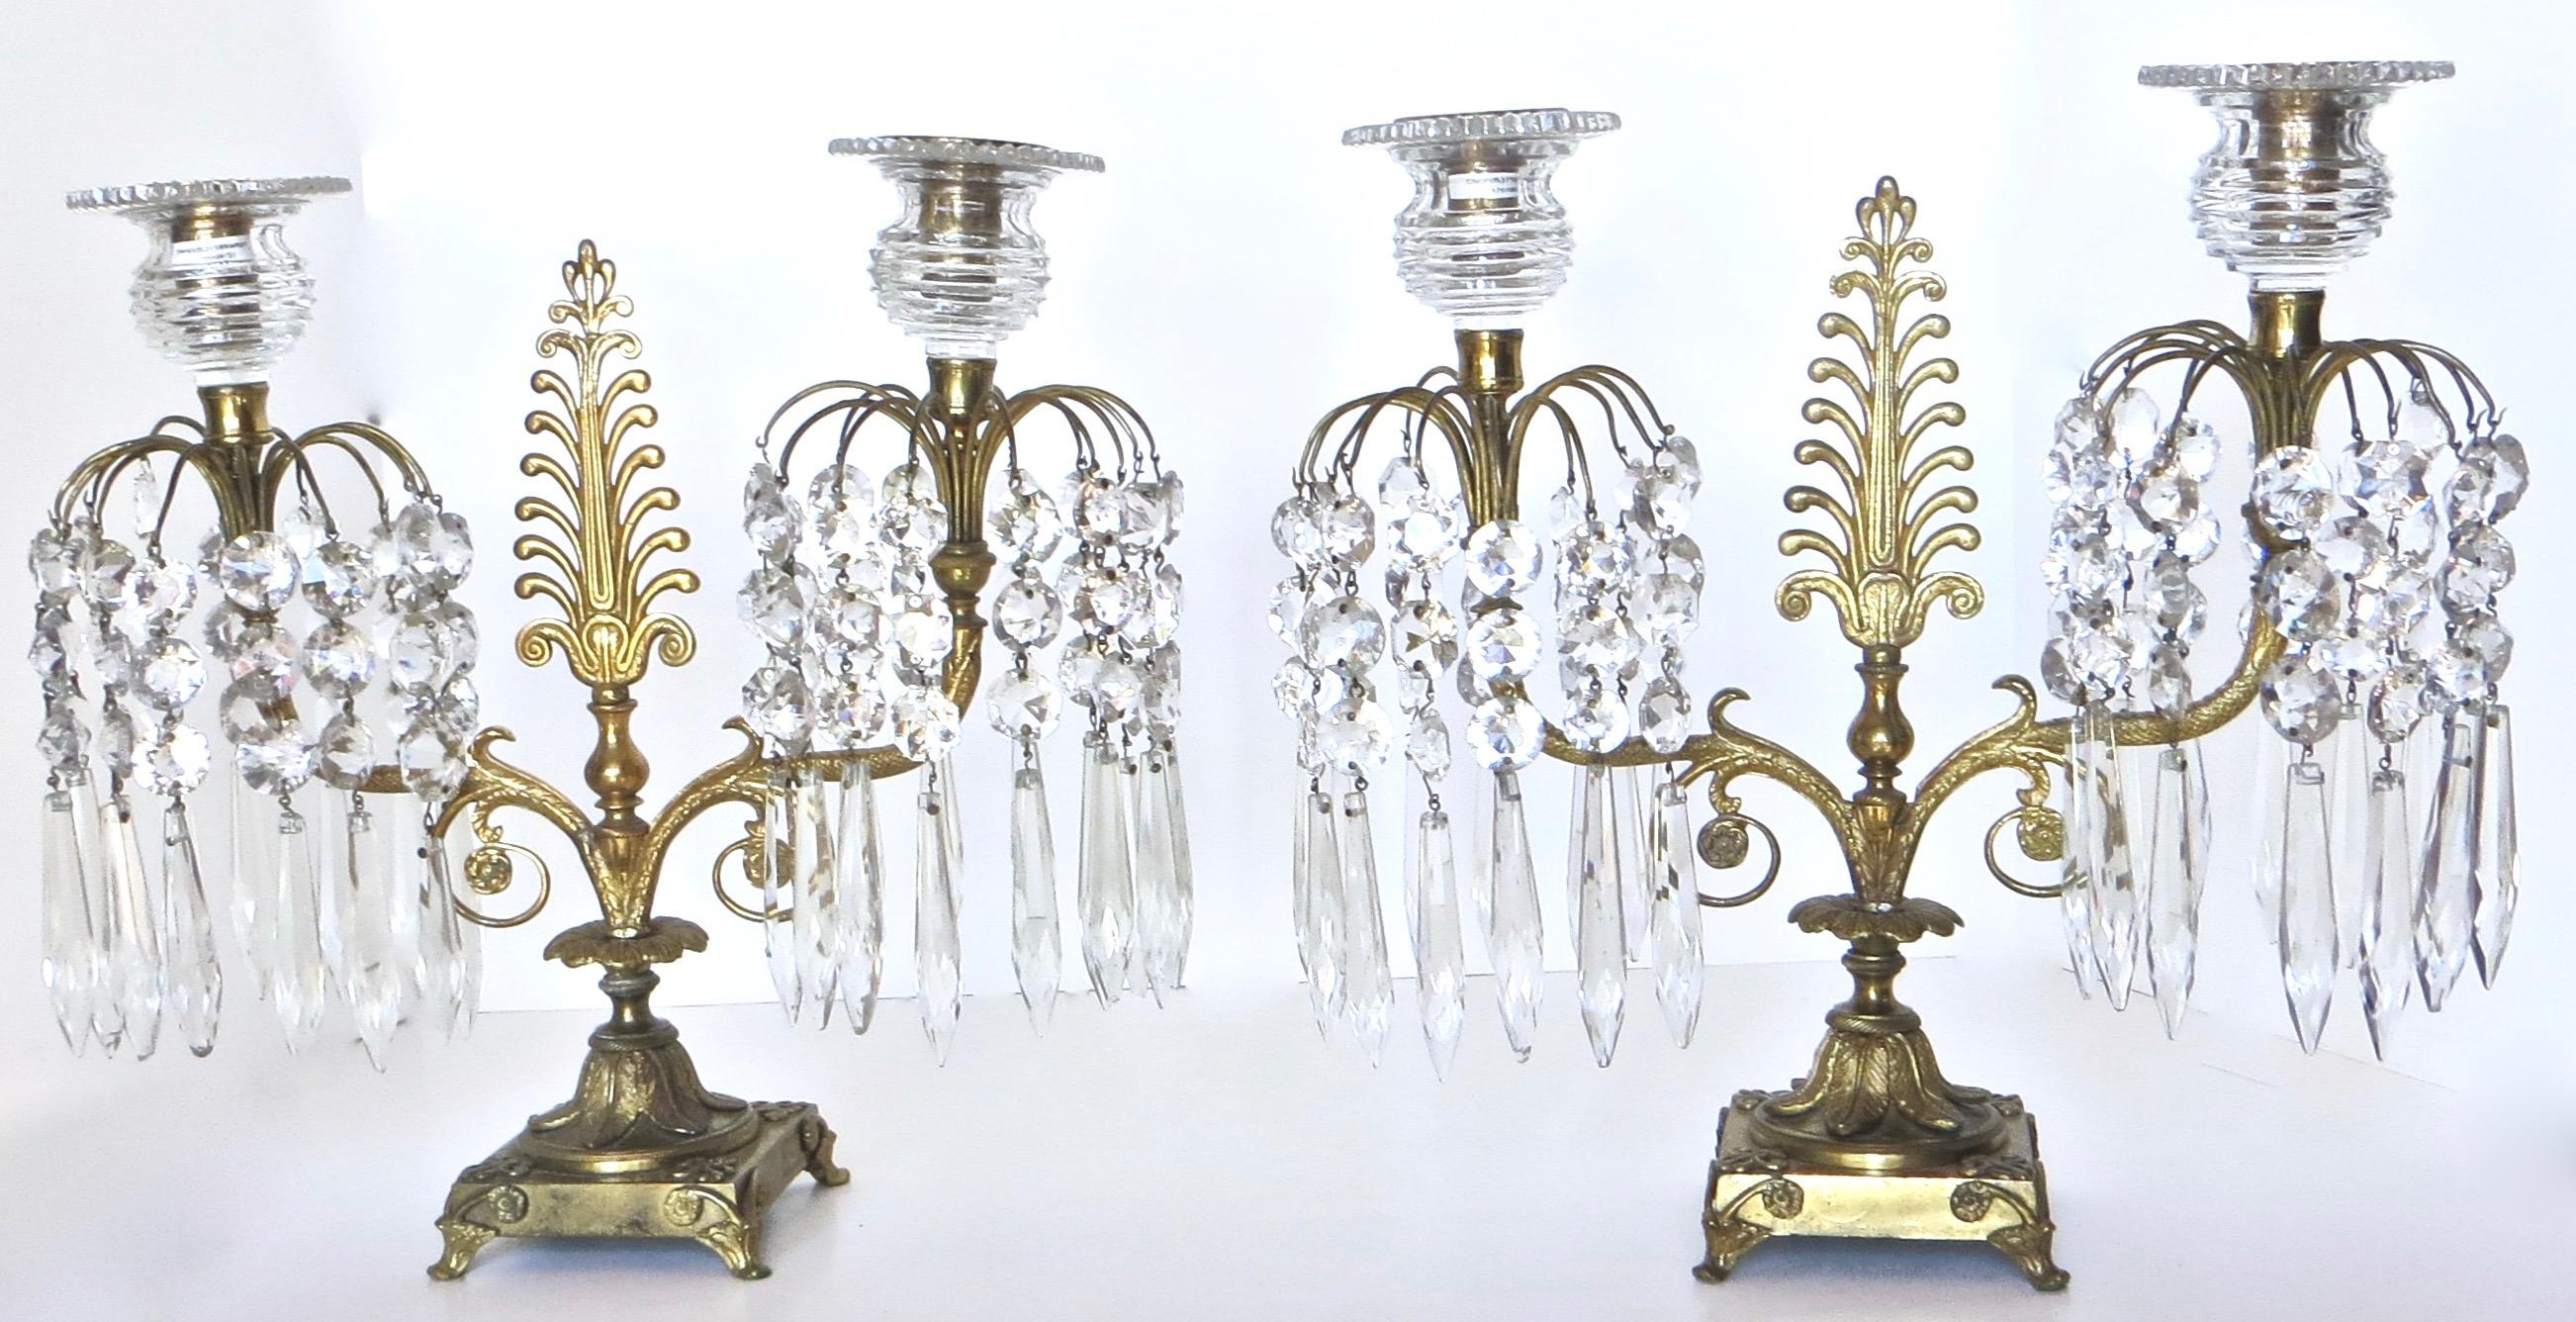 Cast Pair of Regency Cut-Glass and Gilt-Metal Two Light Candelabras, circa 1815 For Sale